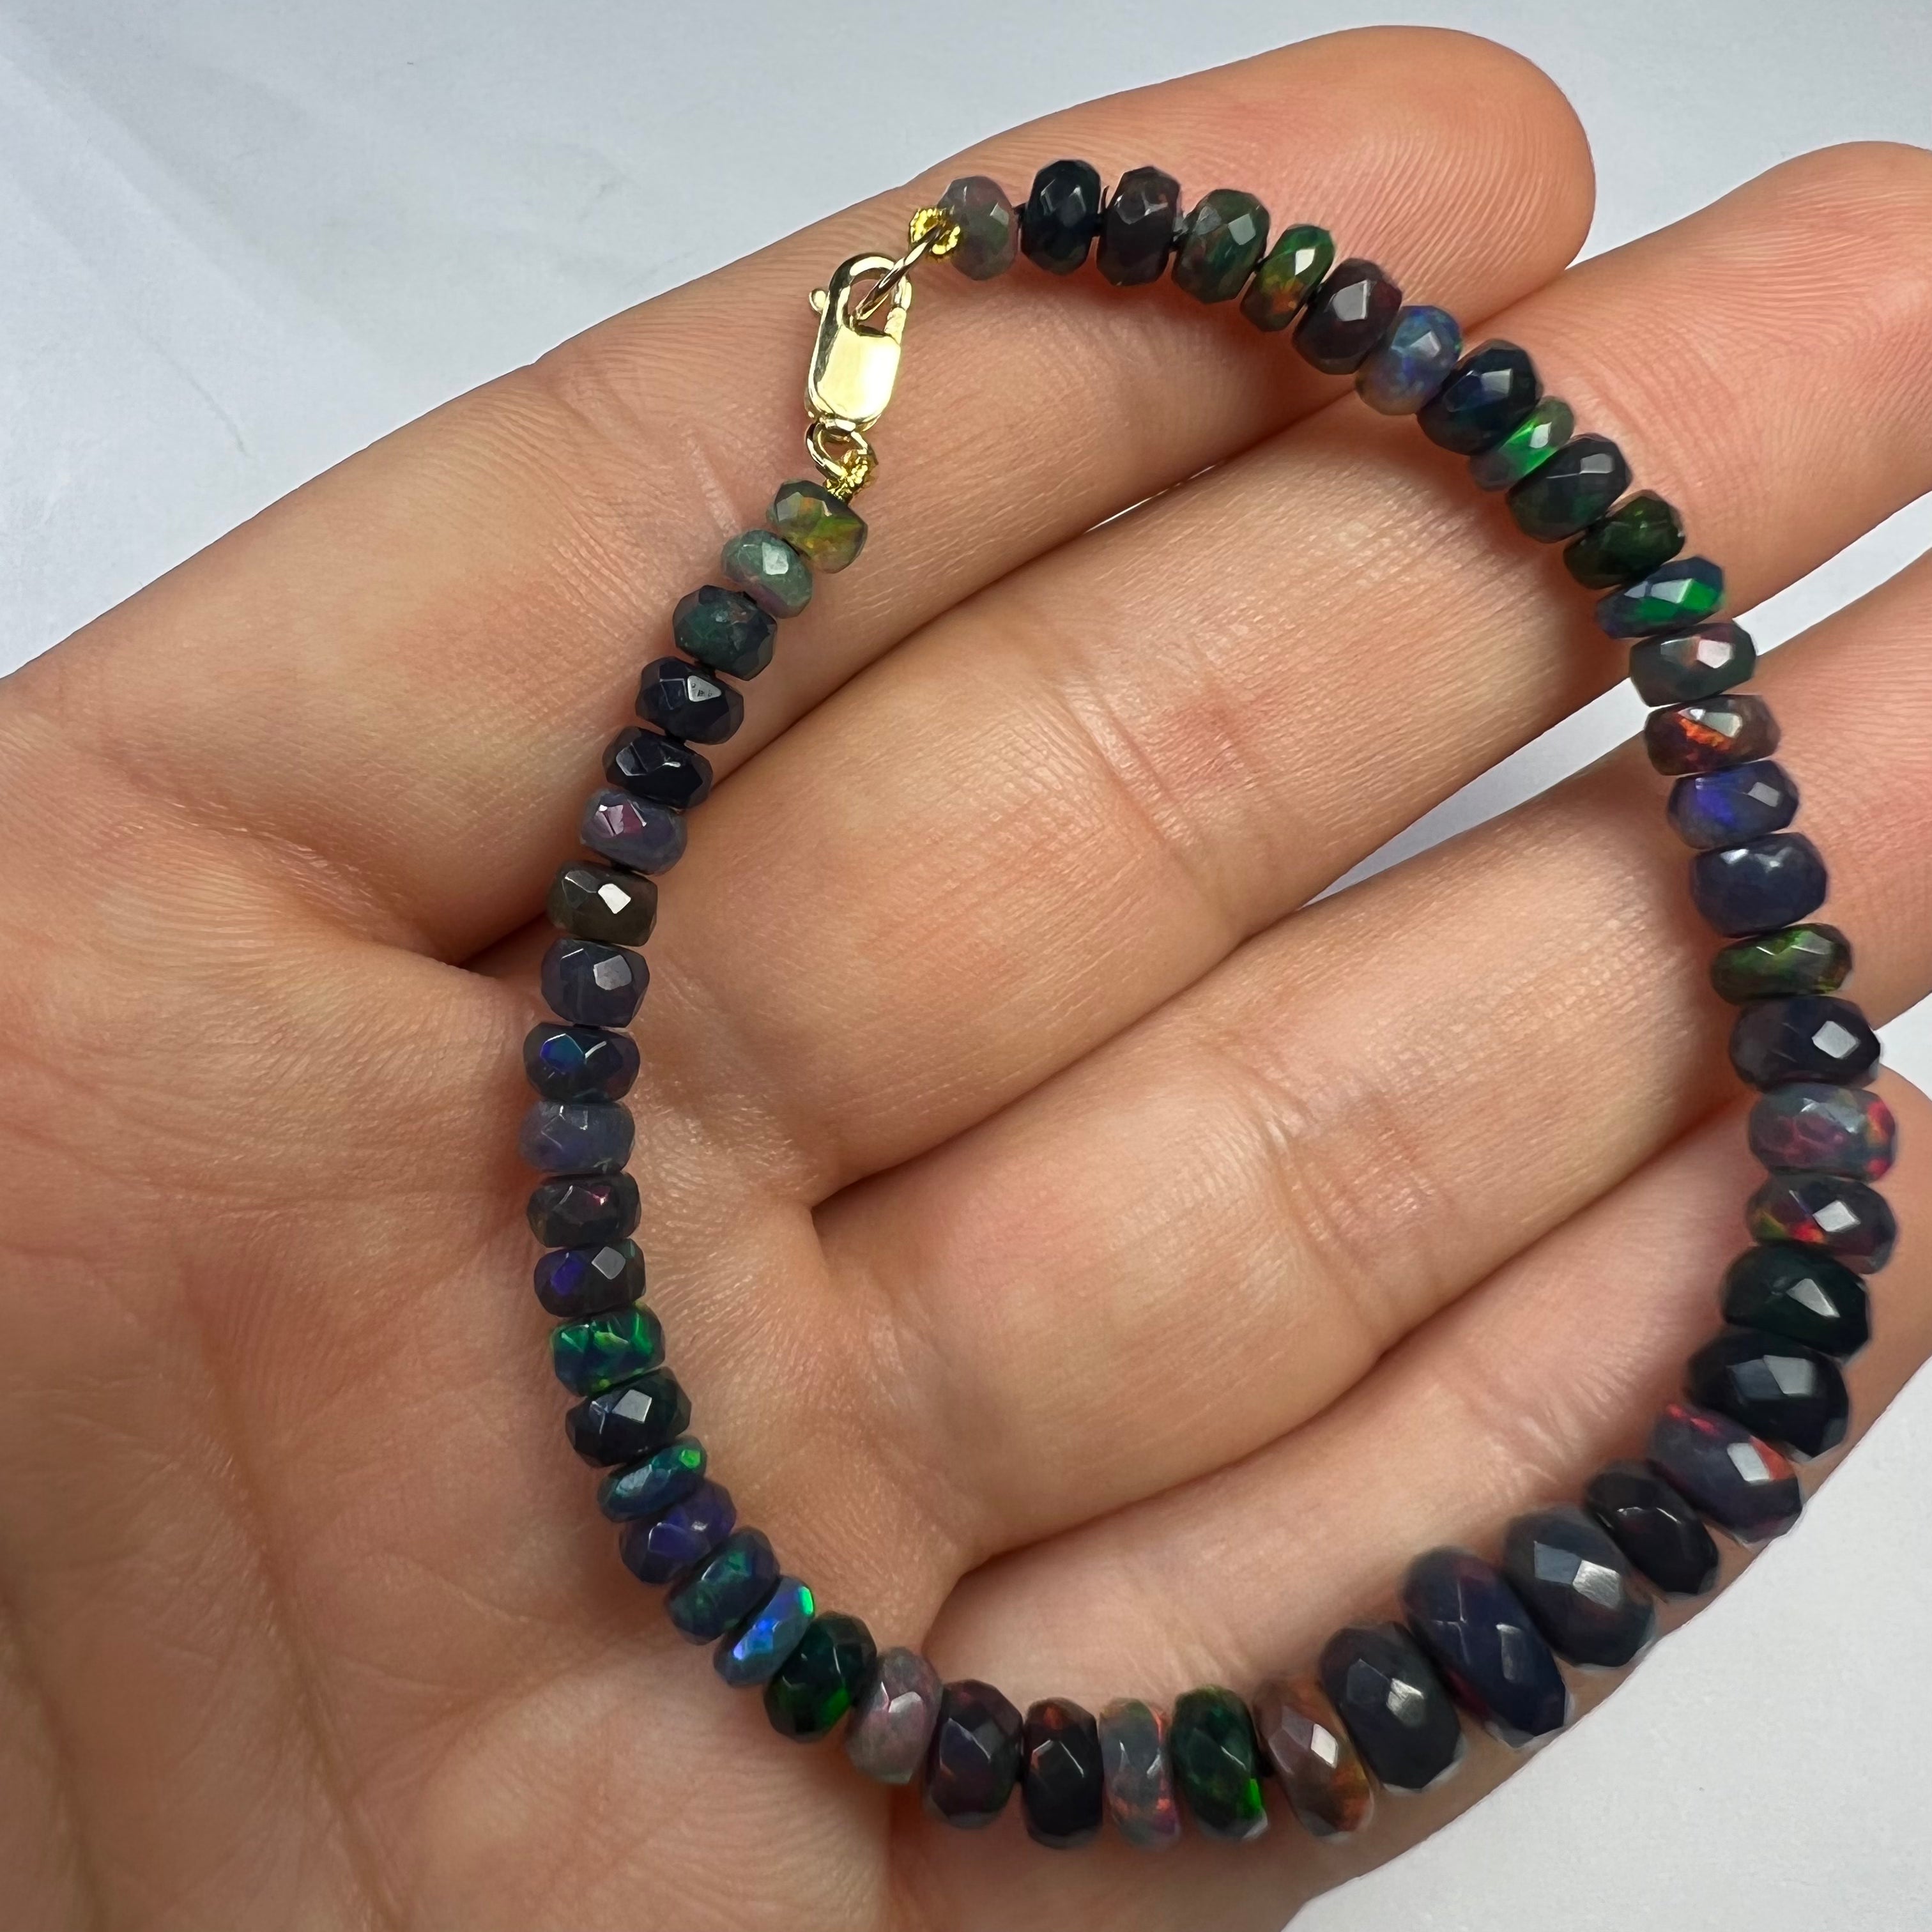 14K Yellow Gold Clasp Black Colorful Beaded Opal Bracelet 6.5"